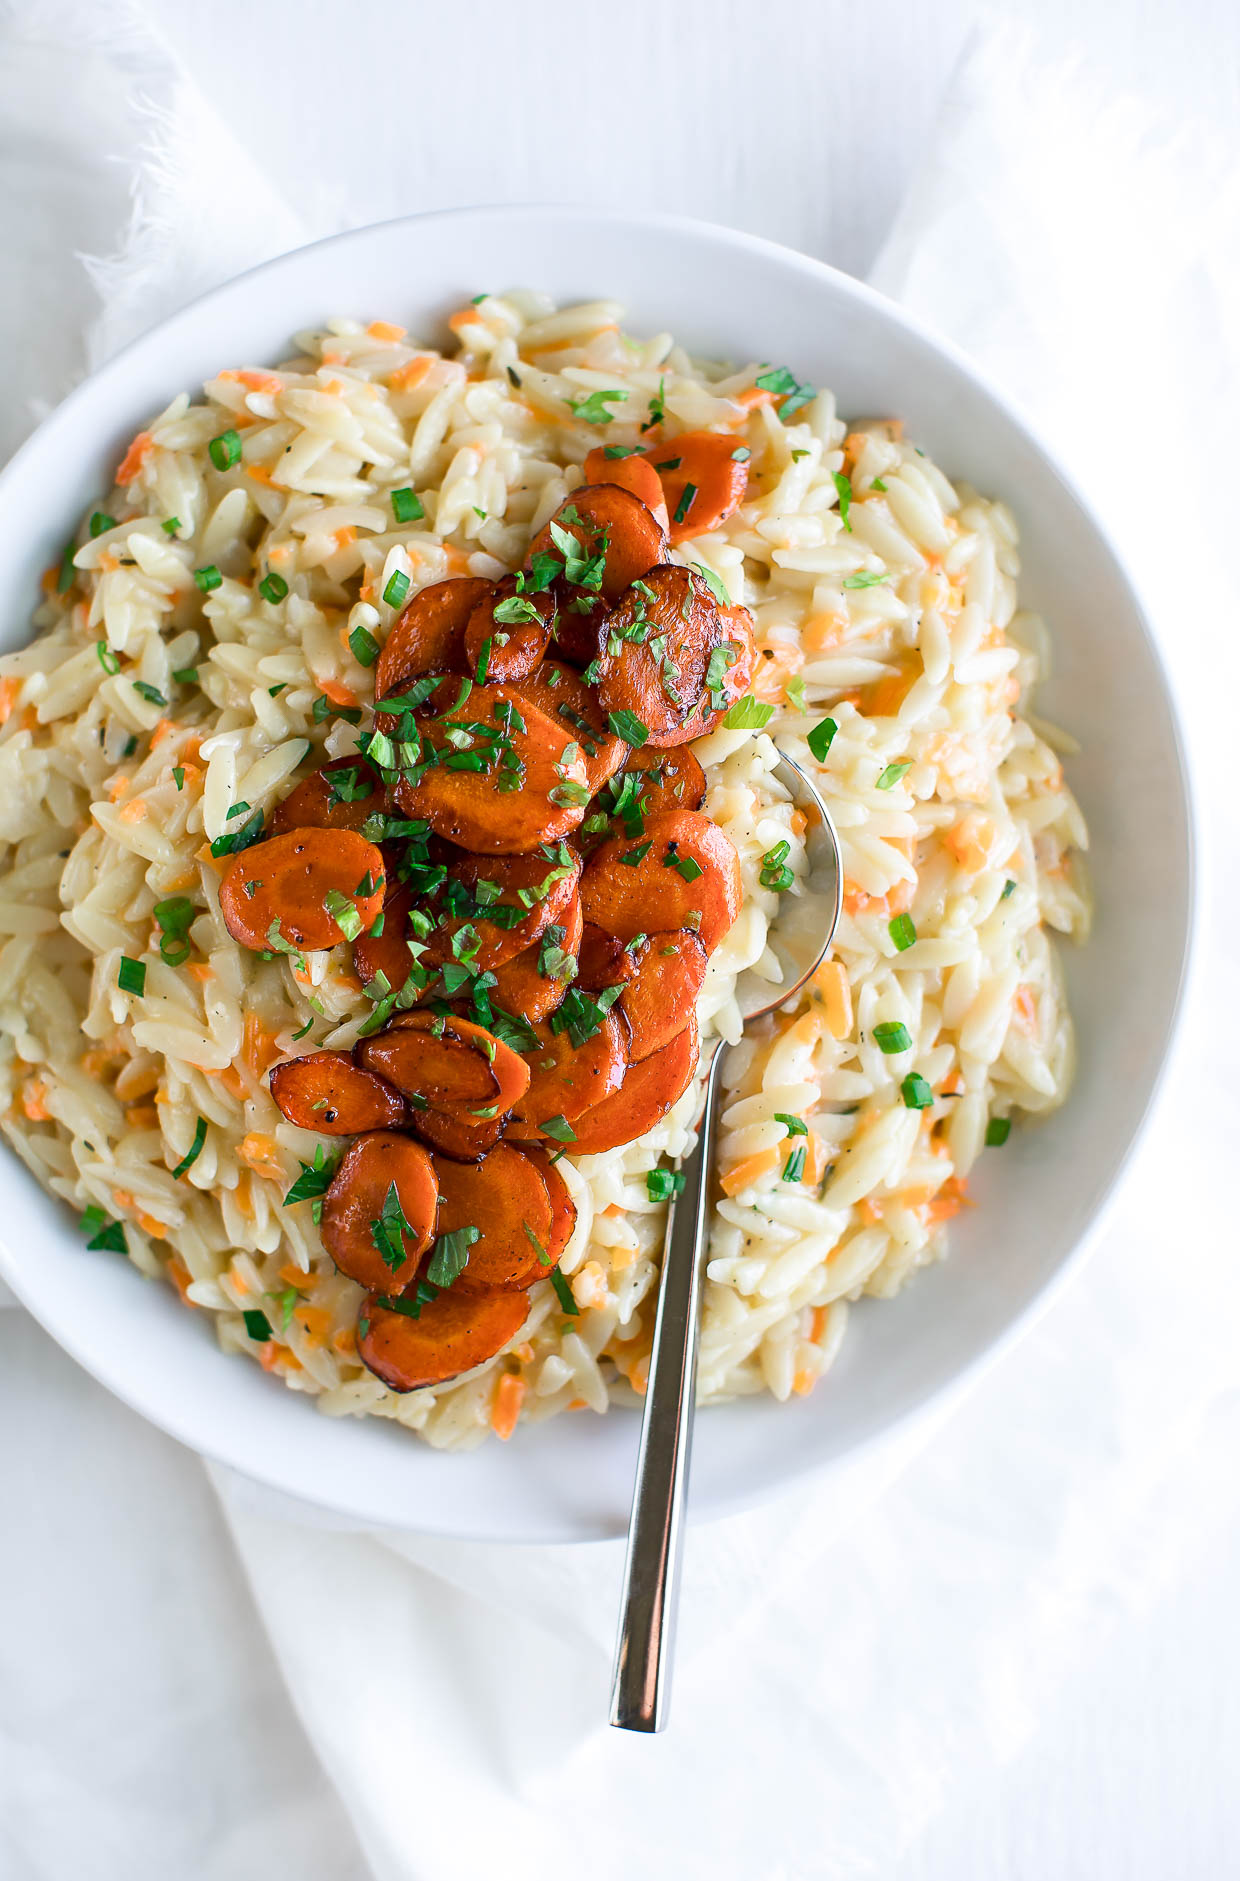 Carrot Orzo with Caramelized Carrot Topping